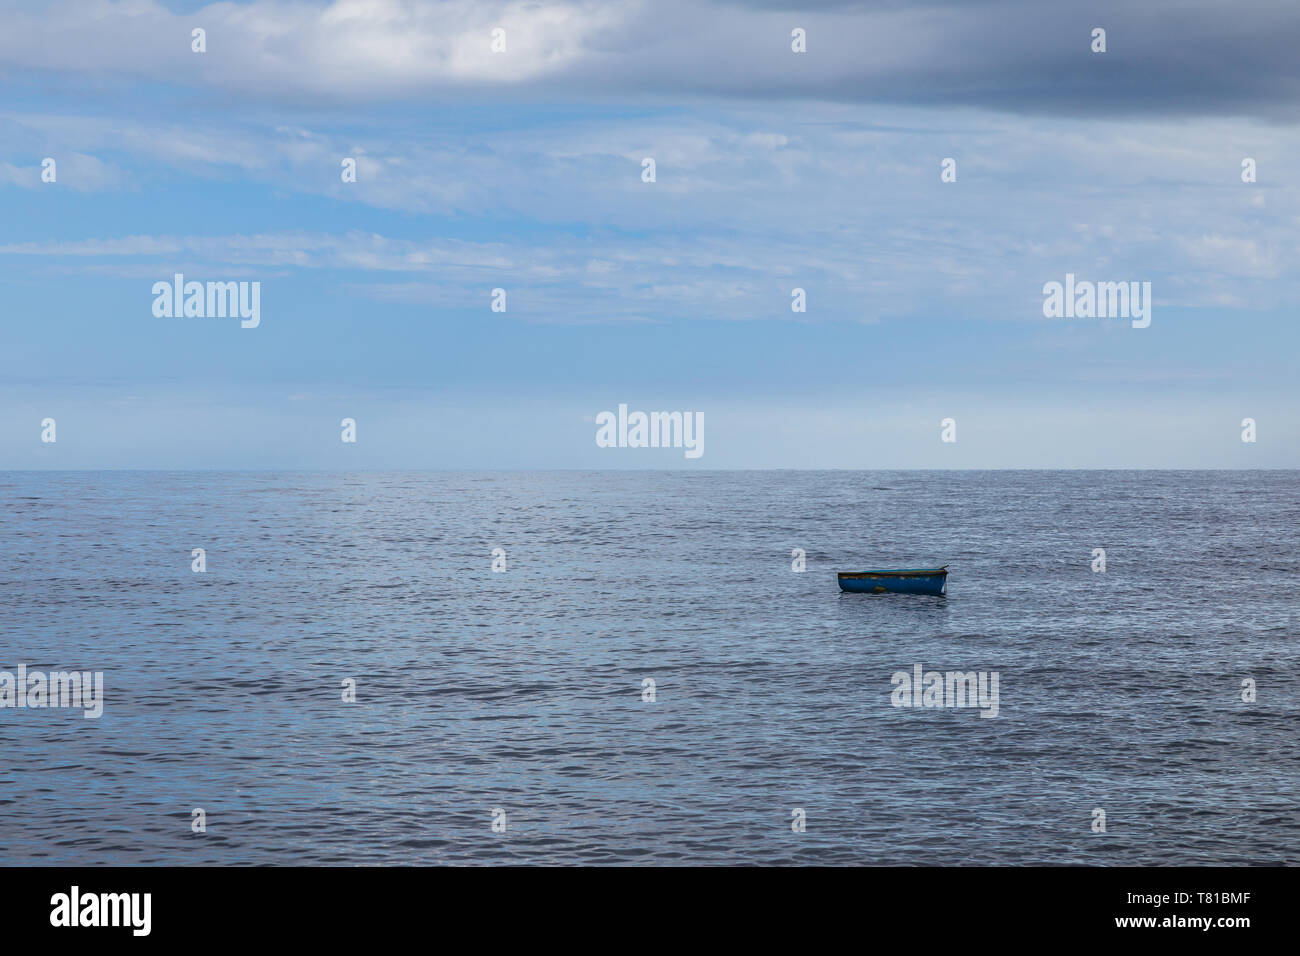 Lonely fishing boat on the calm surface of the ocean, Tenerife, Canary Island, Spain Stock Photo